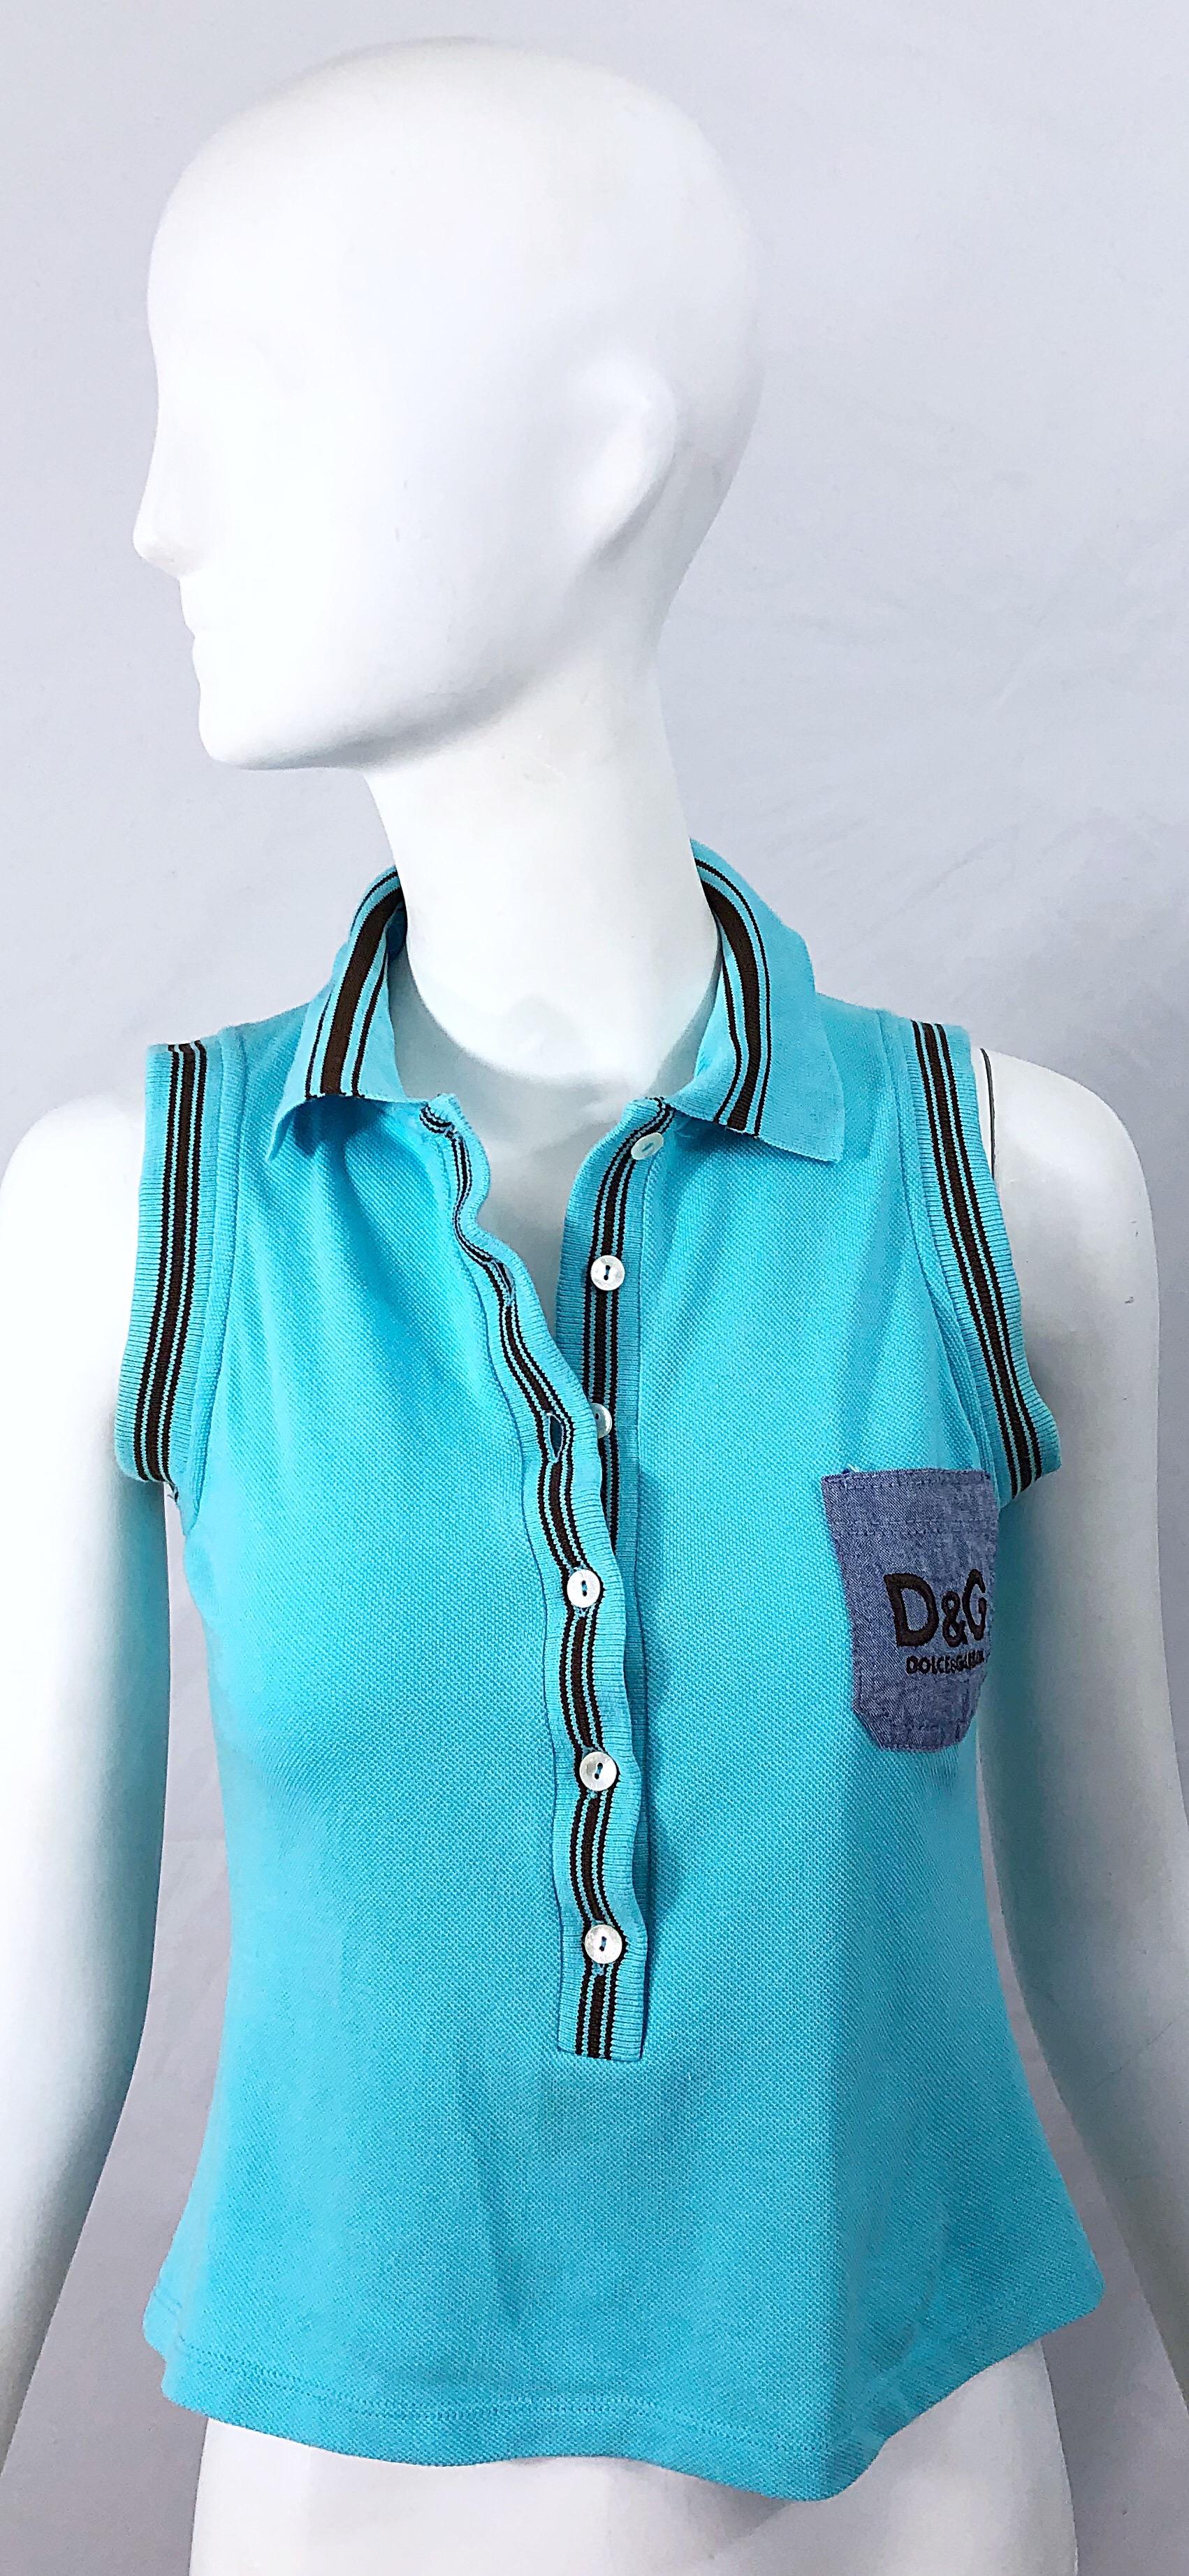 Vintage Dolce & Gabbana 1990s Turquoise Blue + Brown Logo 90s Knit Crop Top Polo For Sale 6